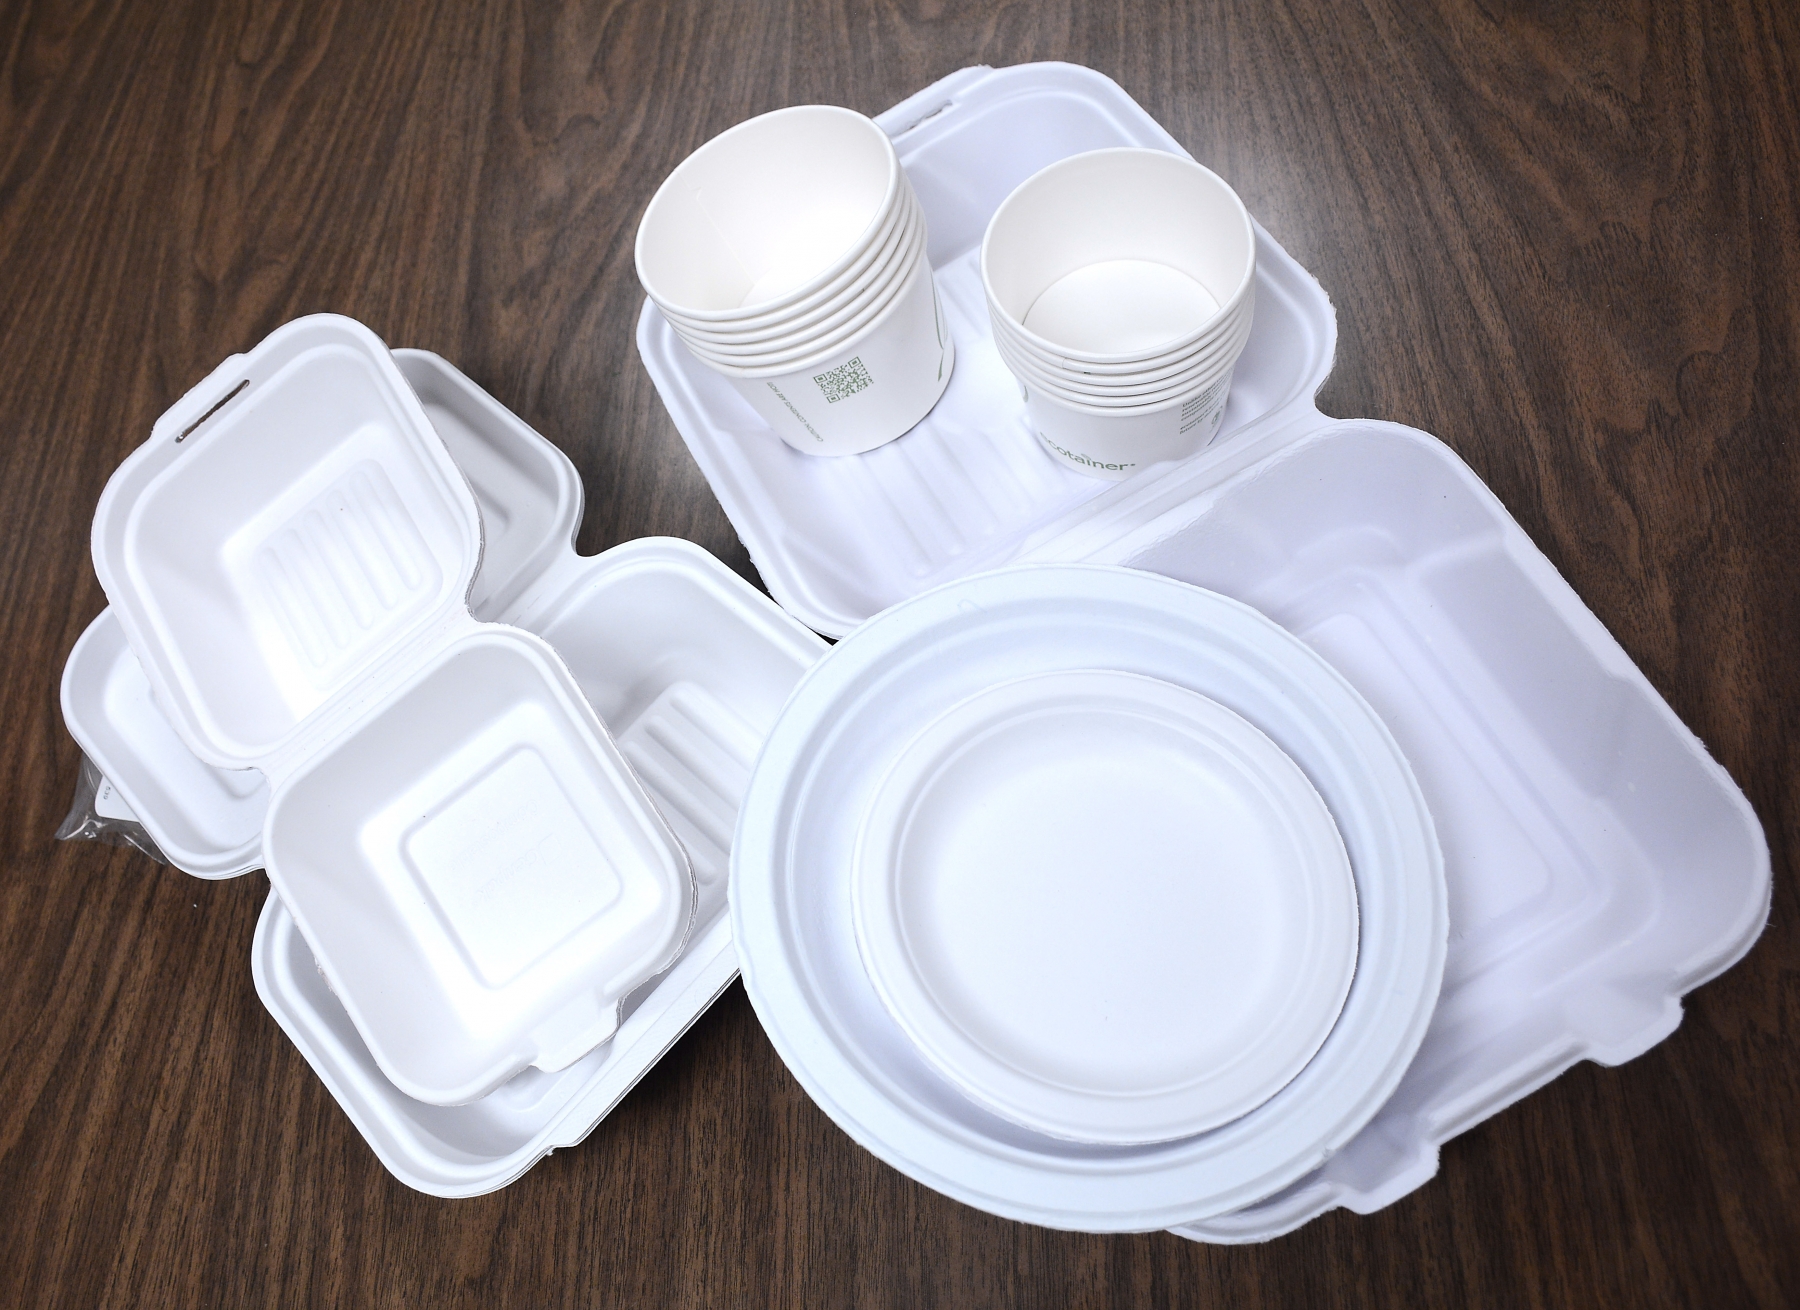 The new eco-friendly paper based to go food containers now used by the Catholic Center cafeteria.
(Dan Cappellazzo/Staff photographer)